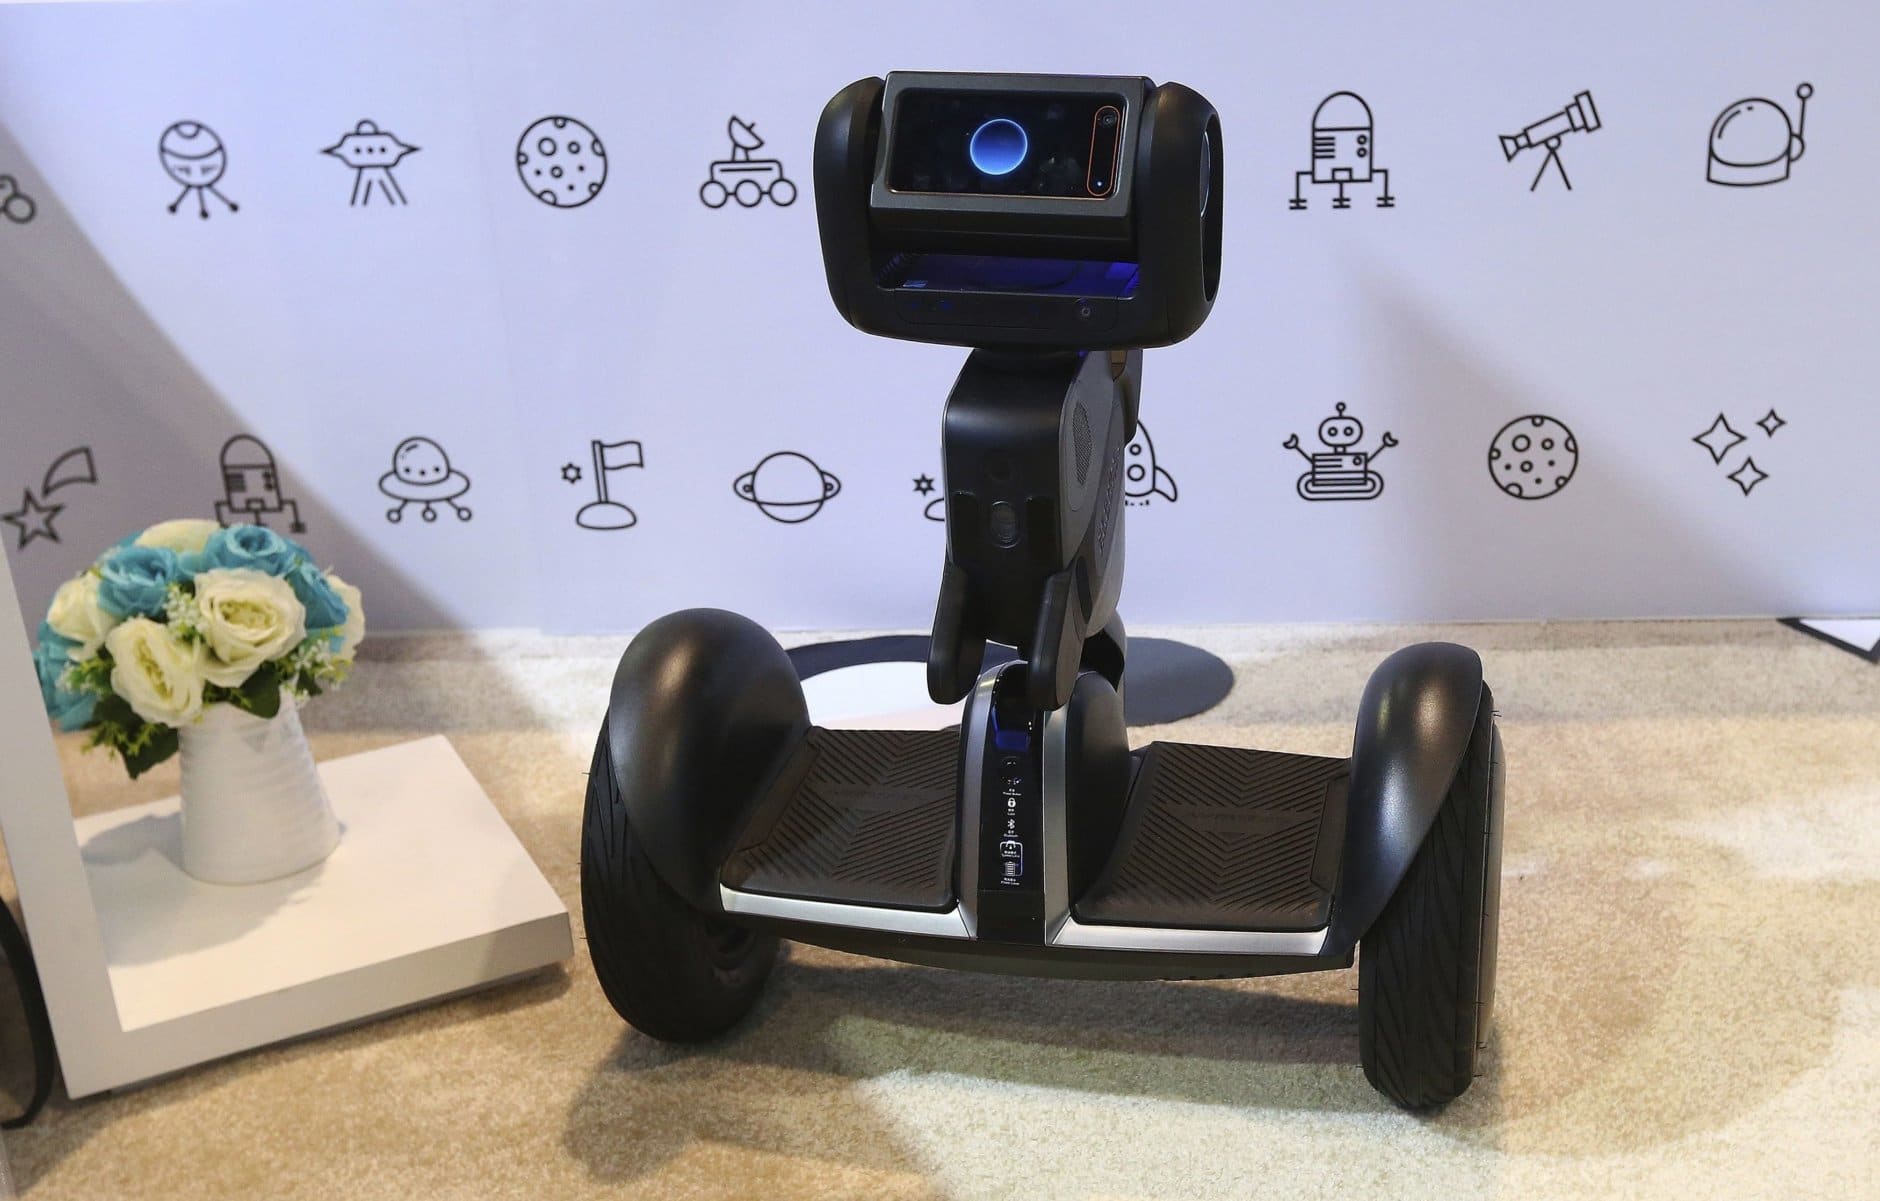 Segway shows off the new Segway-Ninebot Loomo Delivery robot which is the company's initial autonomous vehicle, designed to revolutionize the short distance delivery industry for take-outs, parcels, and goods according to the company, shown at CES International Tuesday, Jan. 8, 2019, in Las Vegas. (AP Photo/Ross D. Franklin)